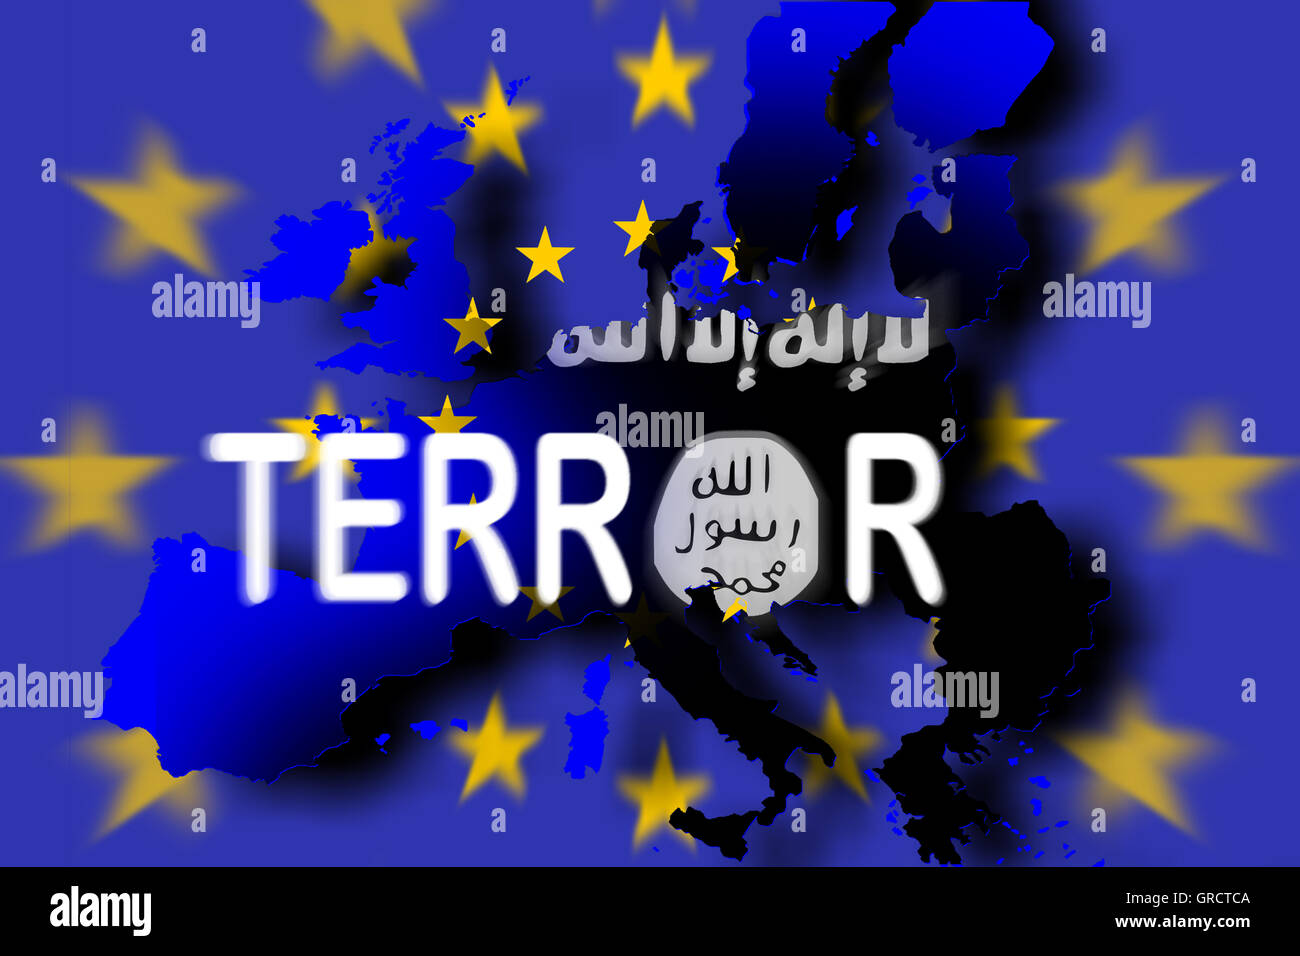 Terrorism With Is Sign On Eu Flag And European Continent Stock Photo